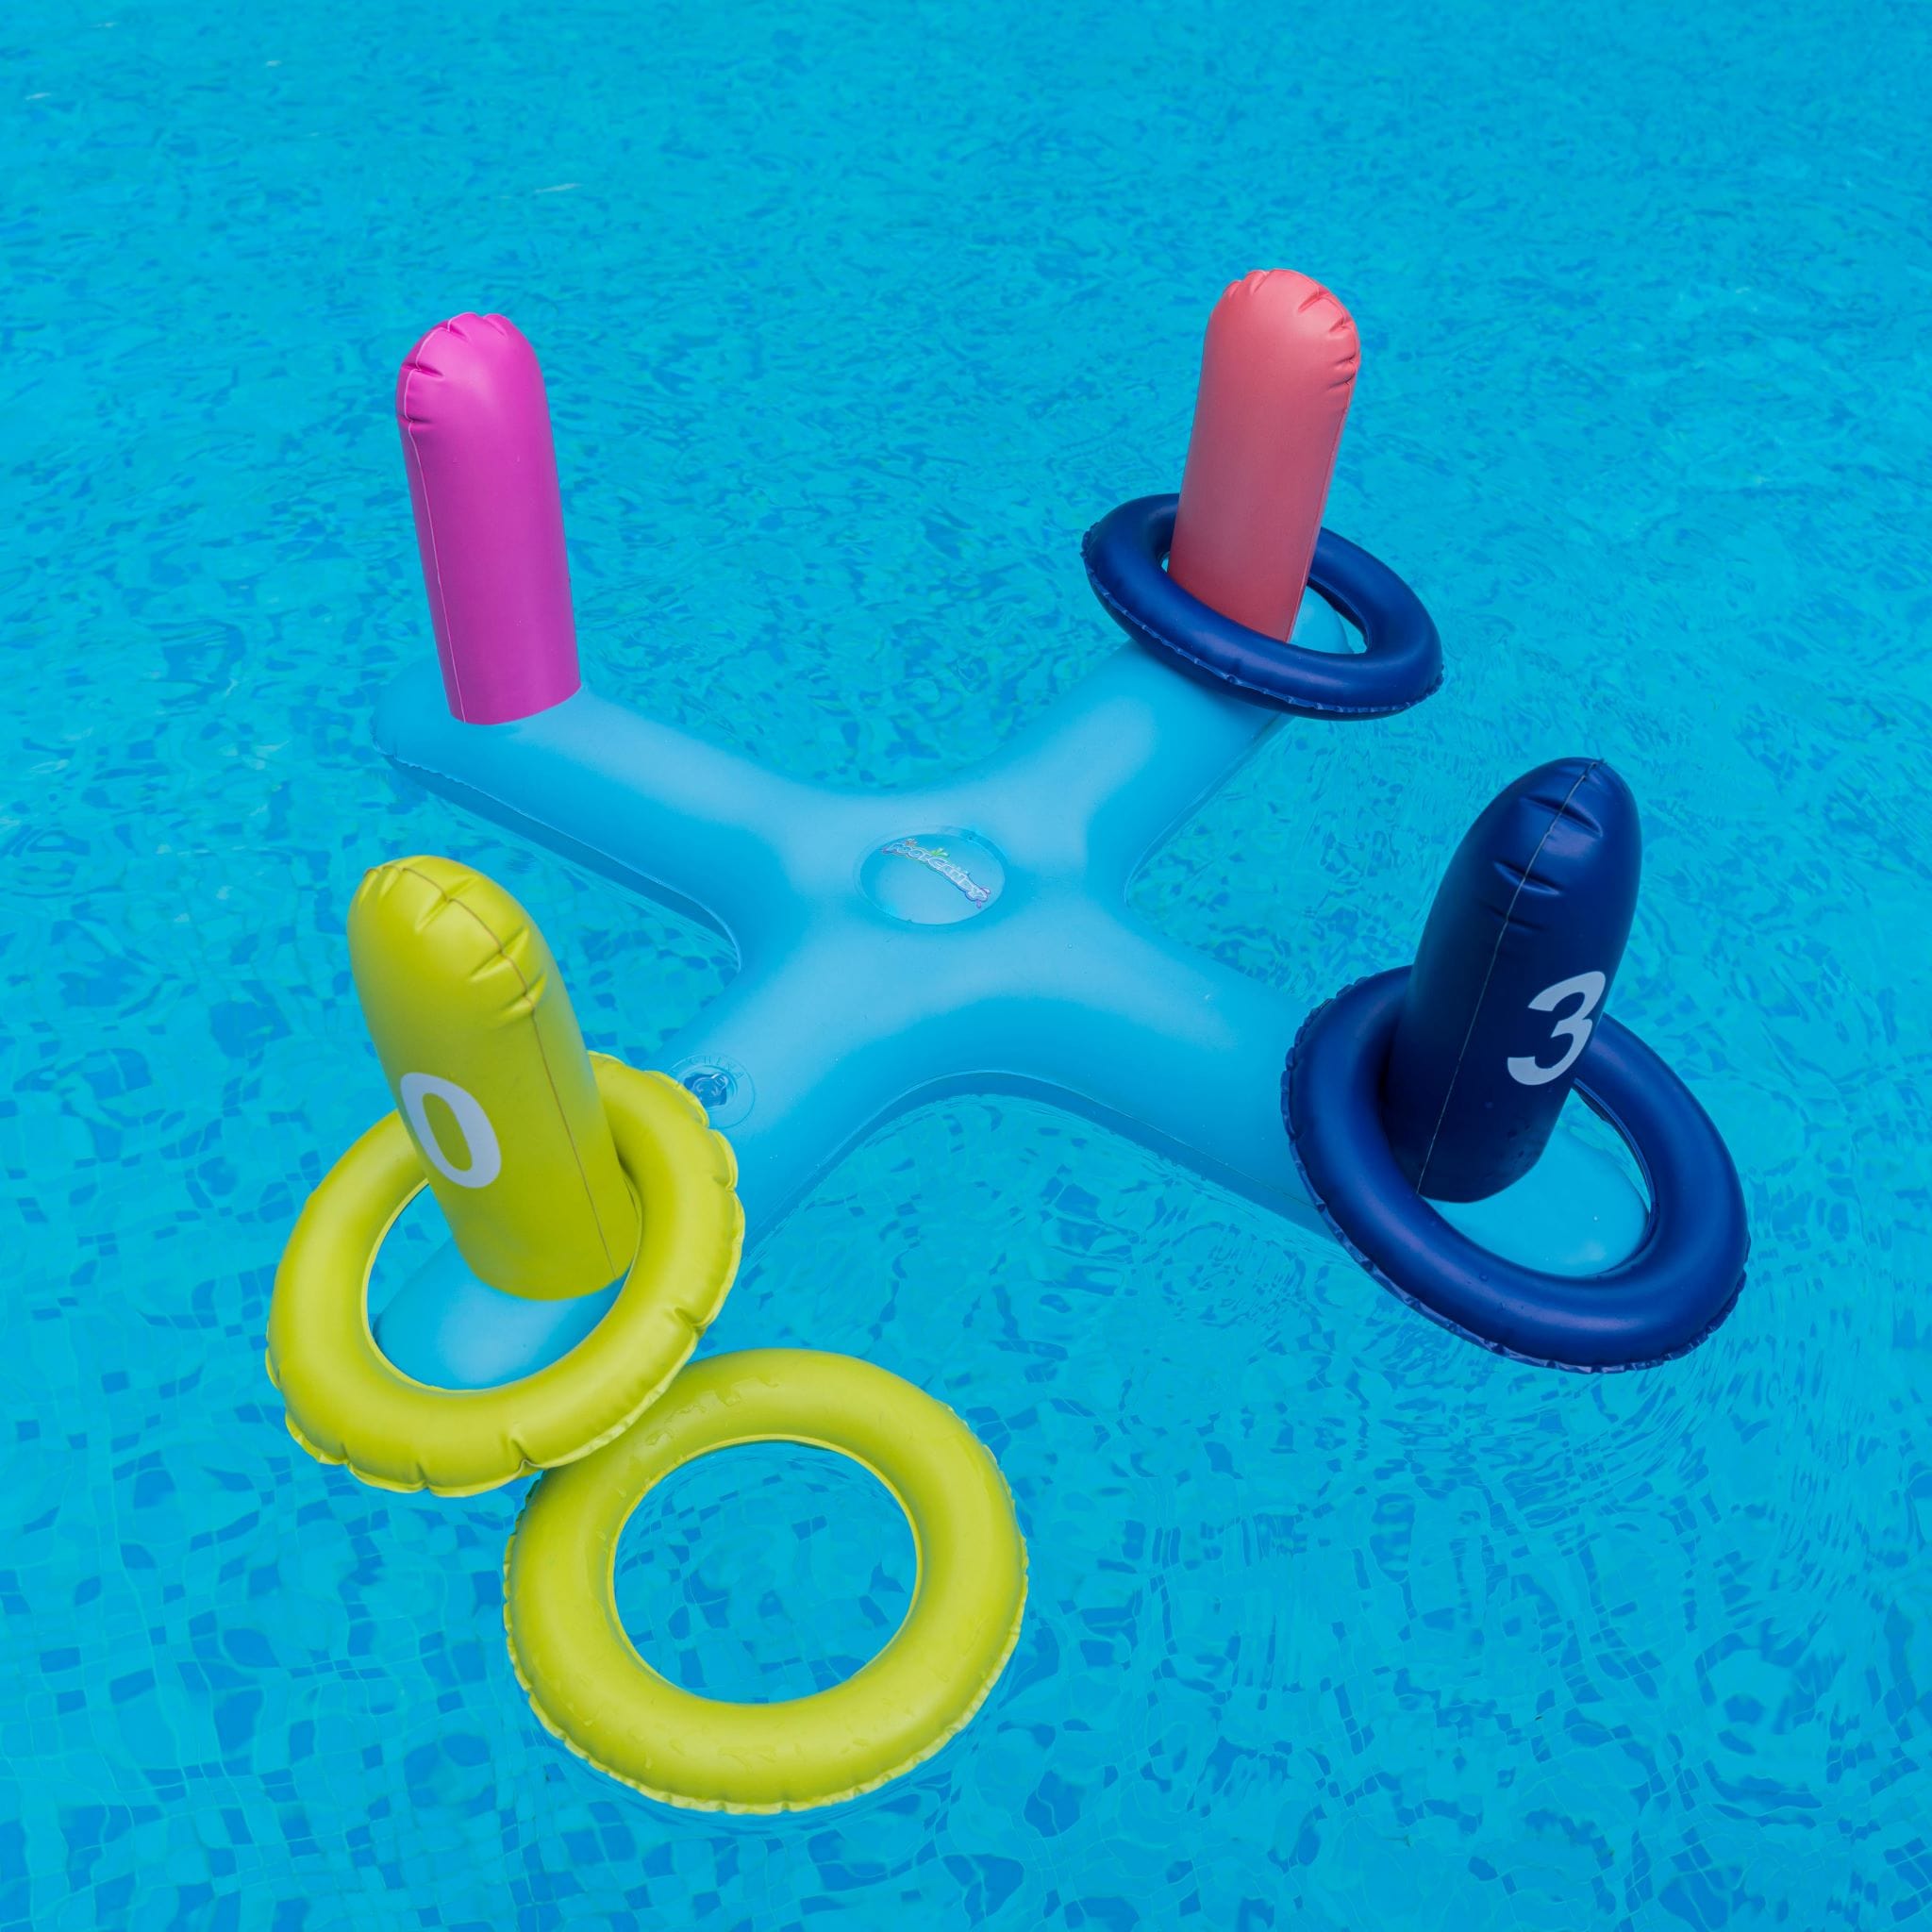 Buy Confidence Set of 2 Pcs Water Ring Game for Kids Hand Held Water Ring  Toss Bubble Game for Birthday Return Gift (Multicolor) Online at Low Prices  in India - Amazon.in